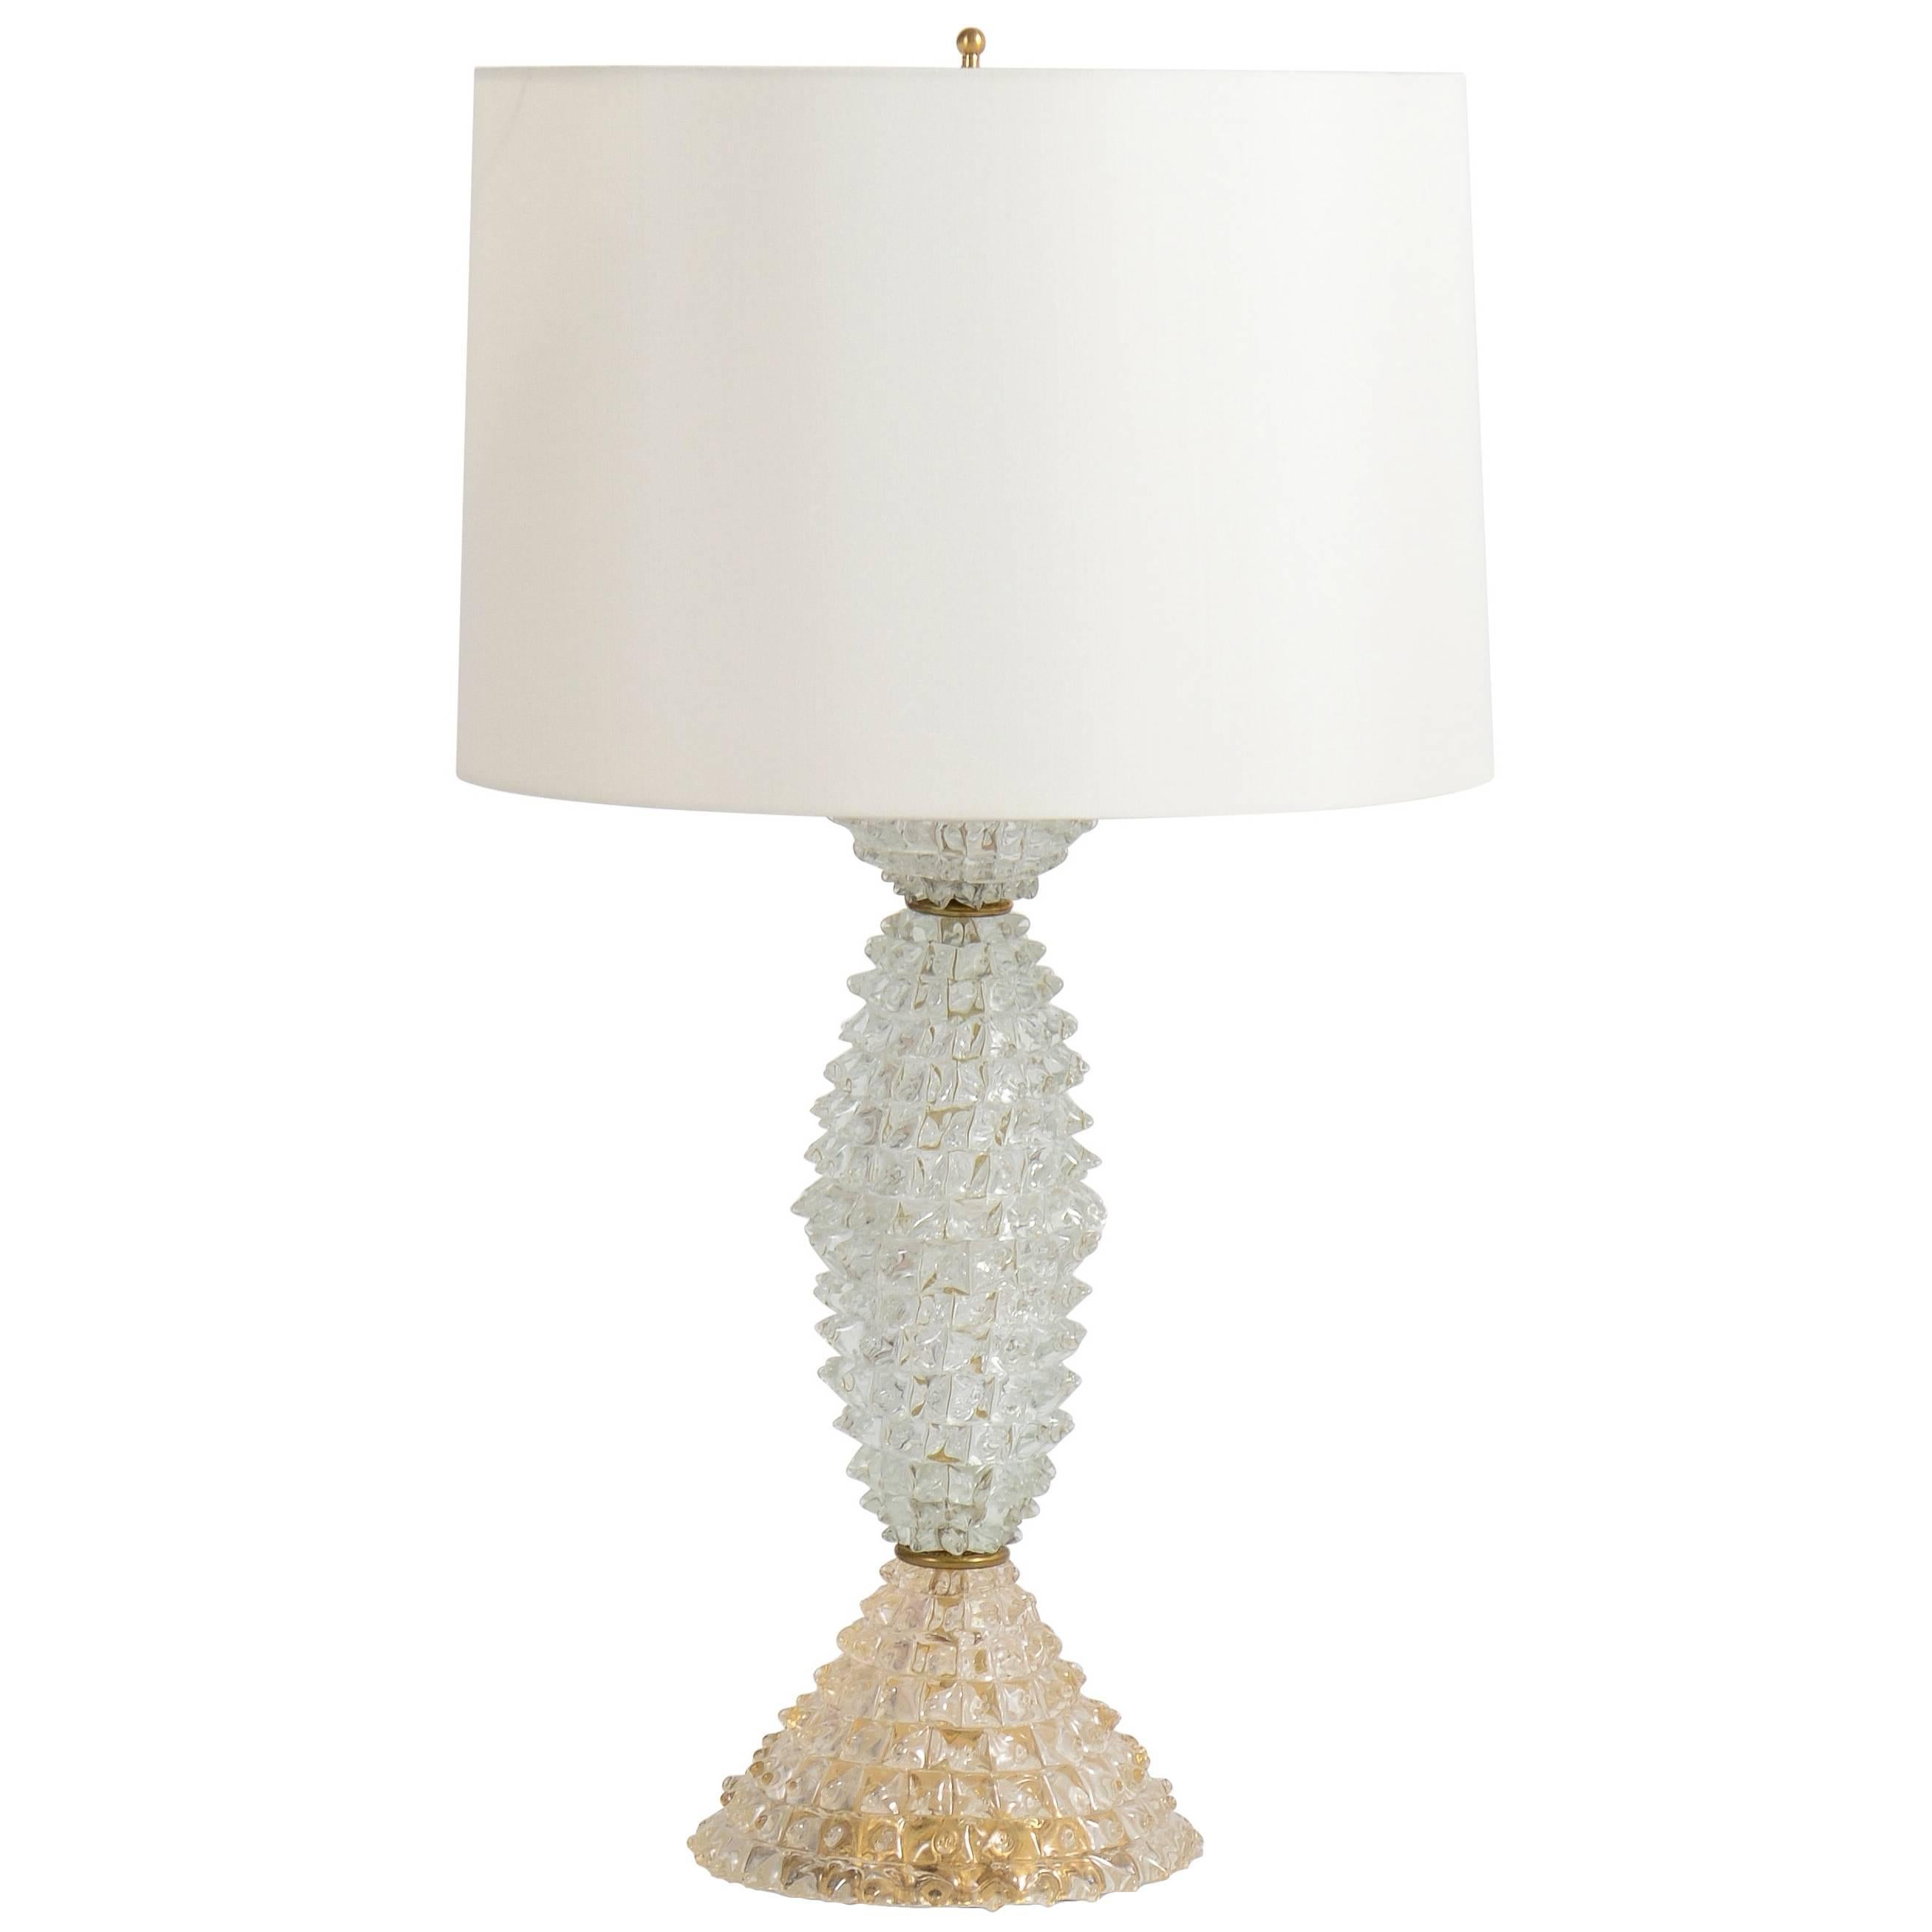 Crepitio Table Lamp by Ercole Barovier For Sale